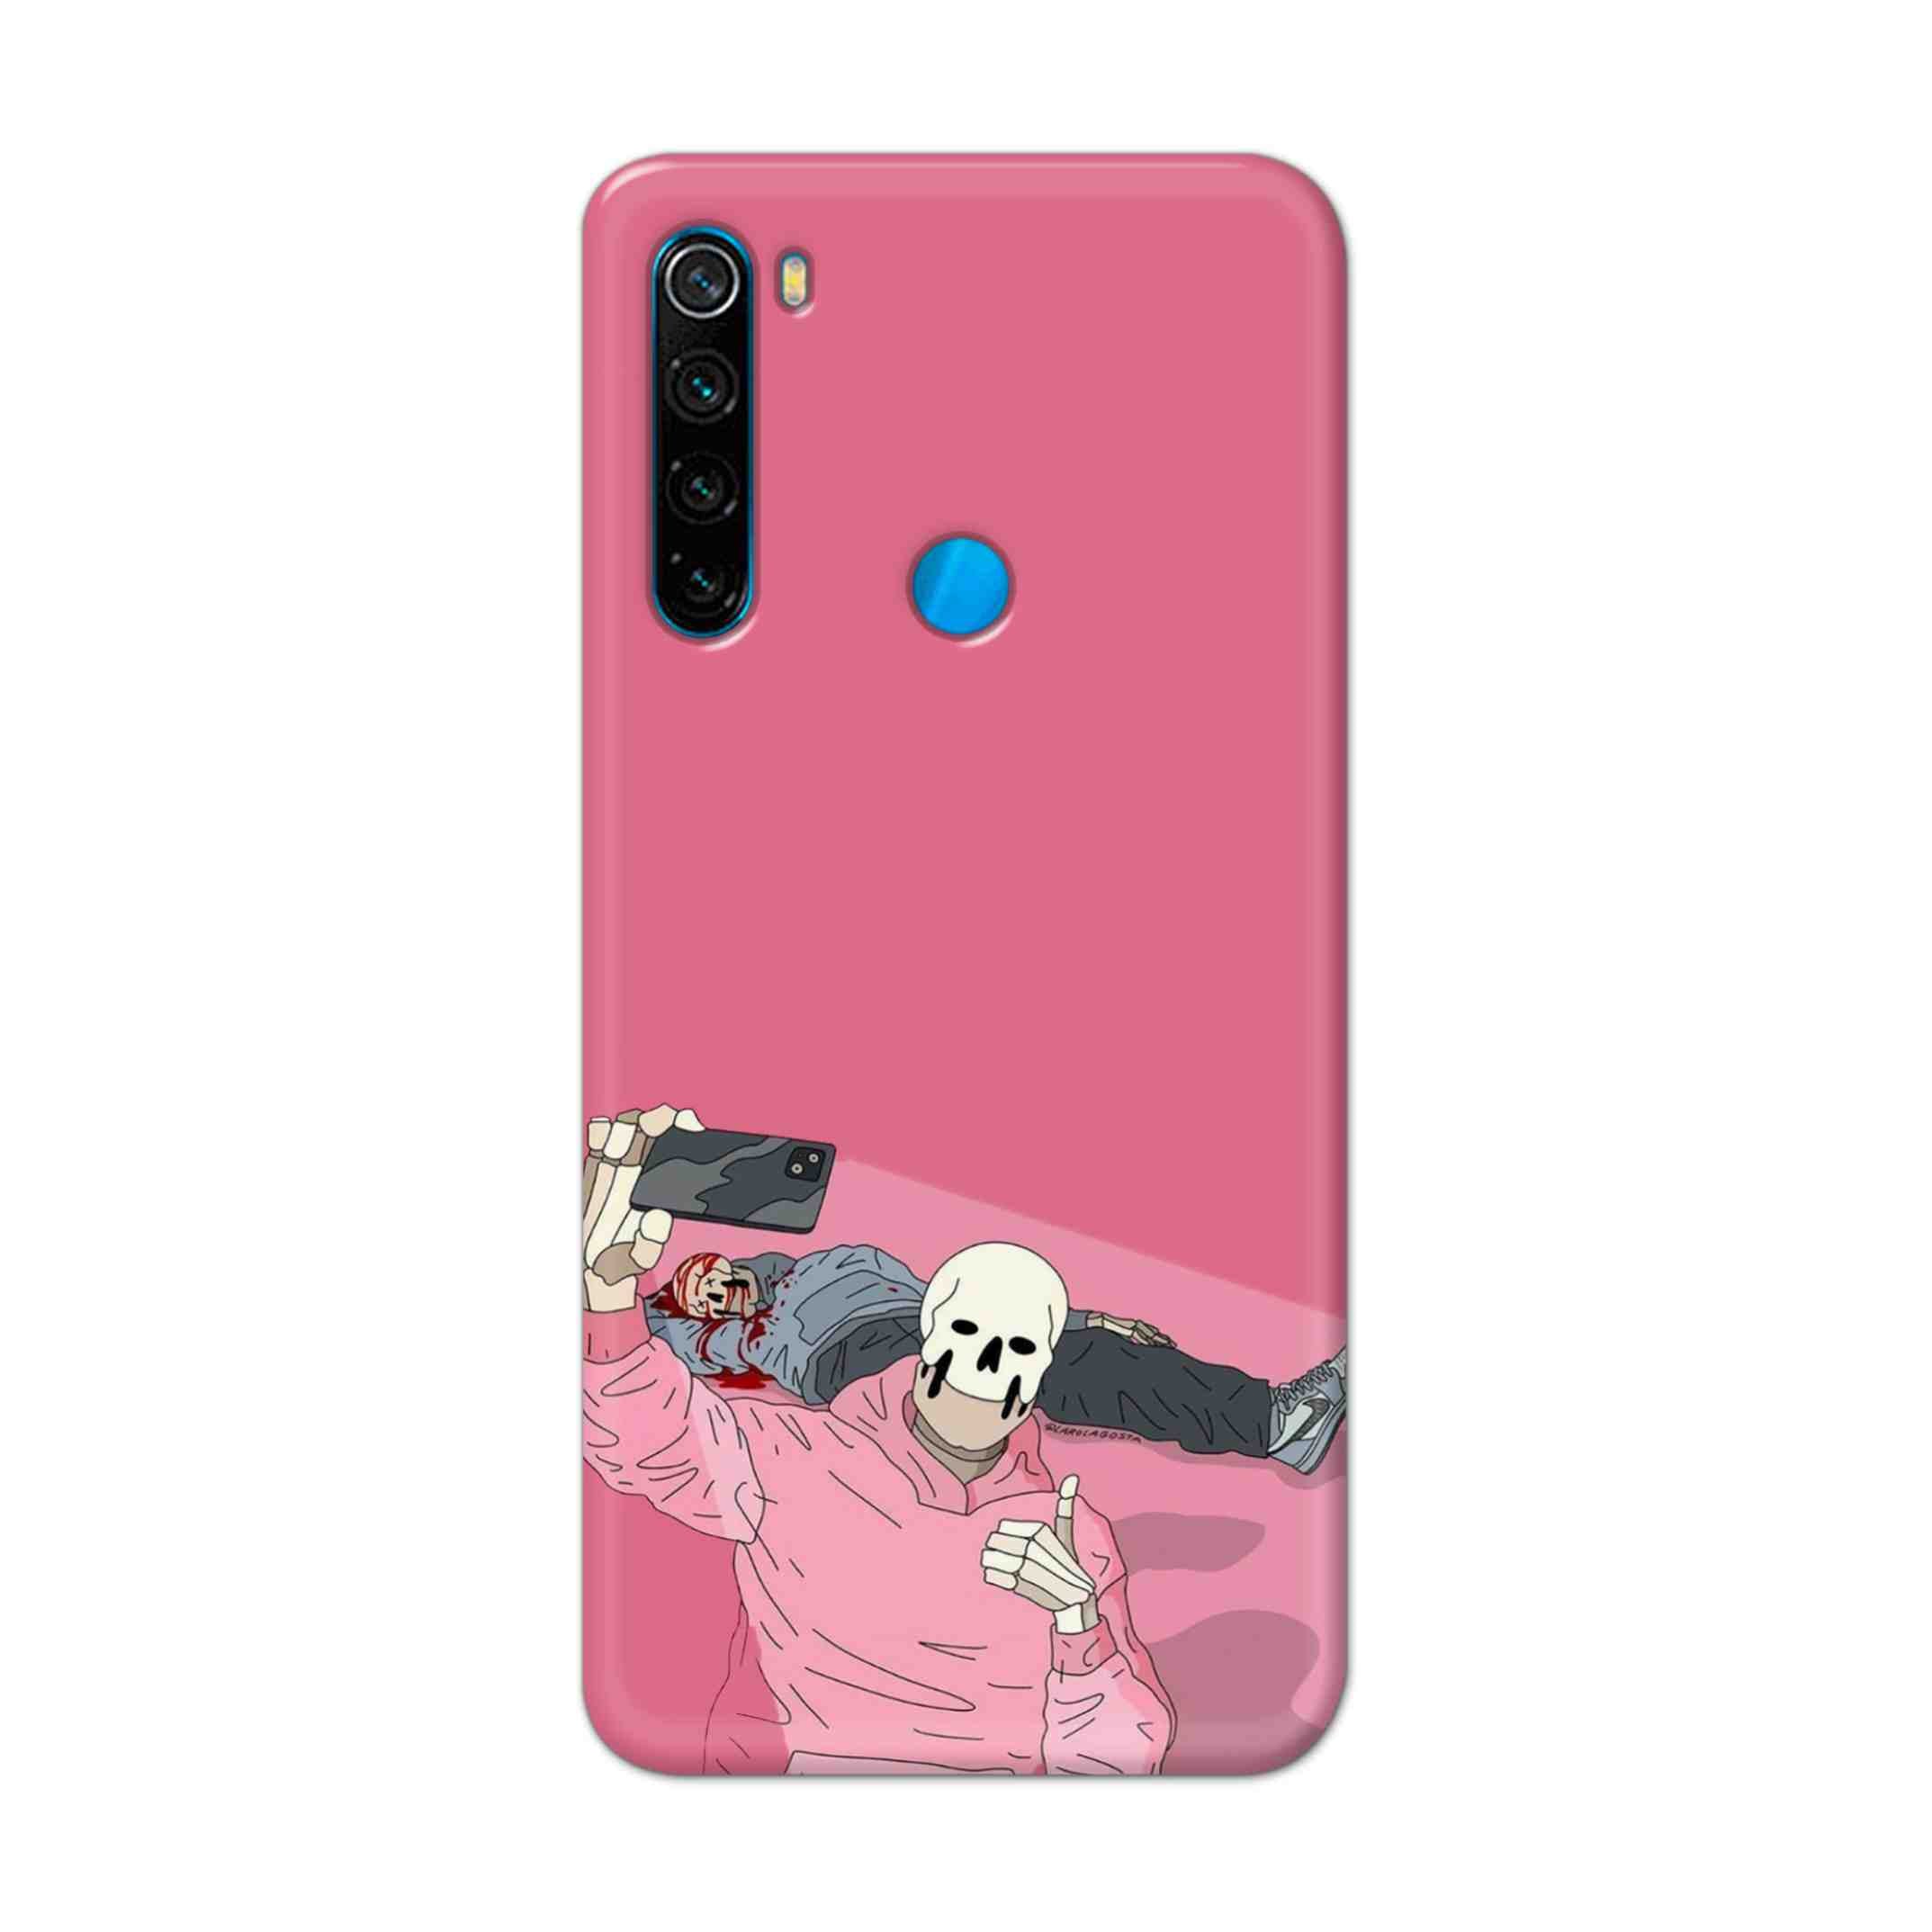 Buy Selfie Hard Back Mobile Phone Case Cover For Xiaomi Redmi Note 8 Online